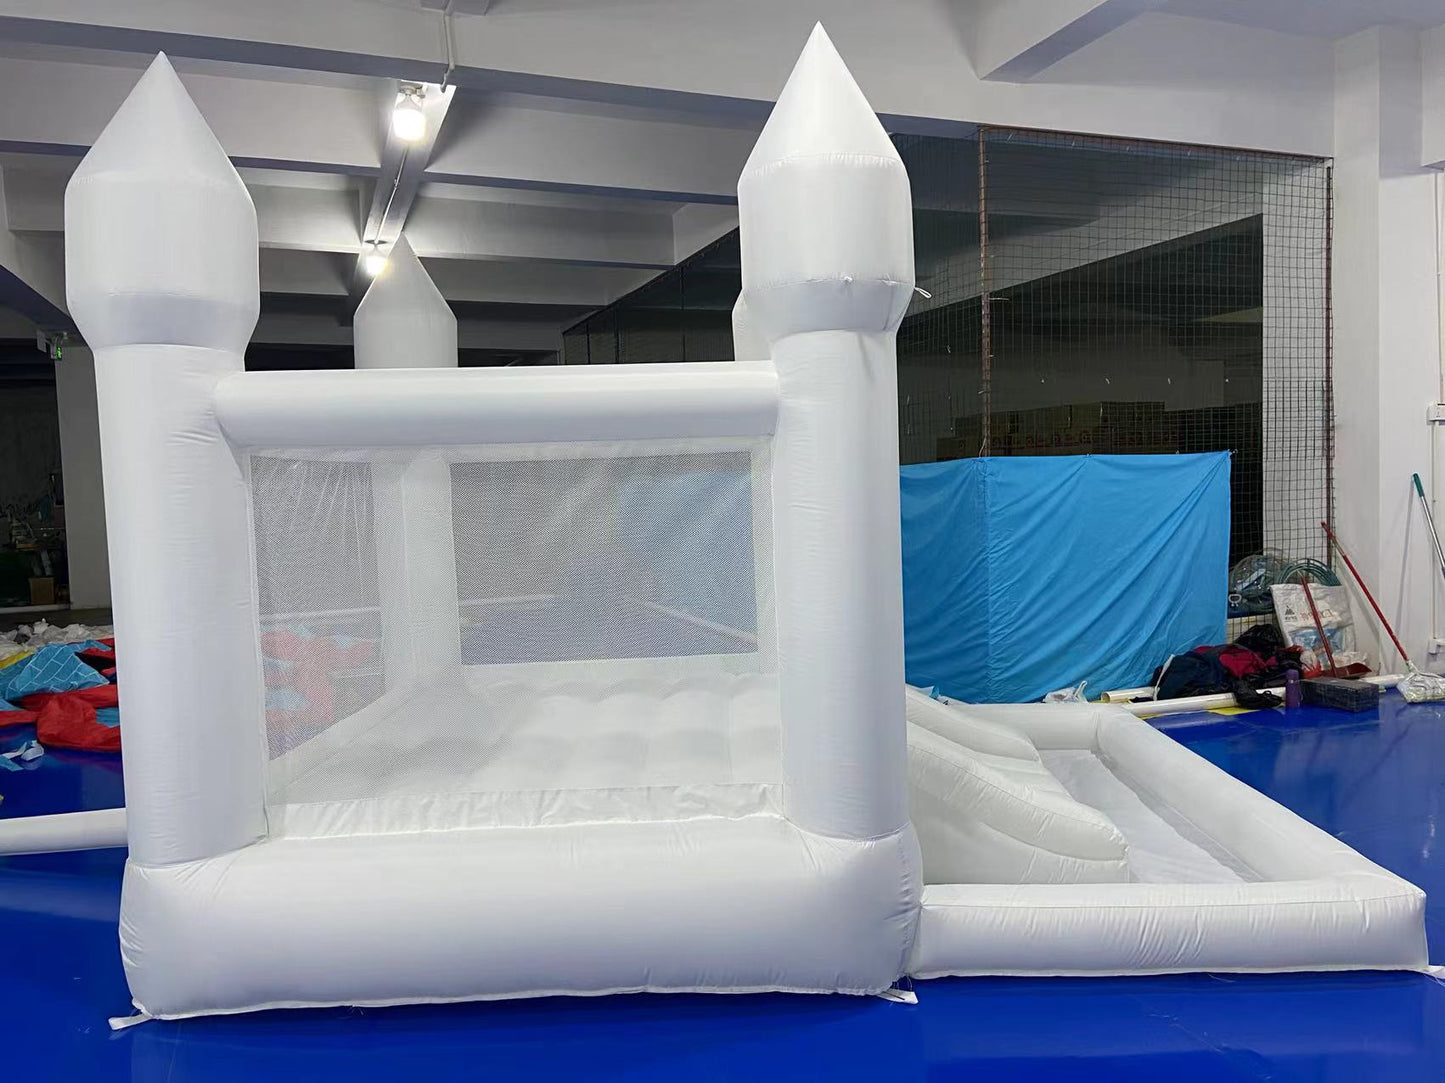 8x13ft Oxford White Bounce House With Ball Pit For Toddler